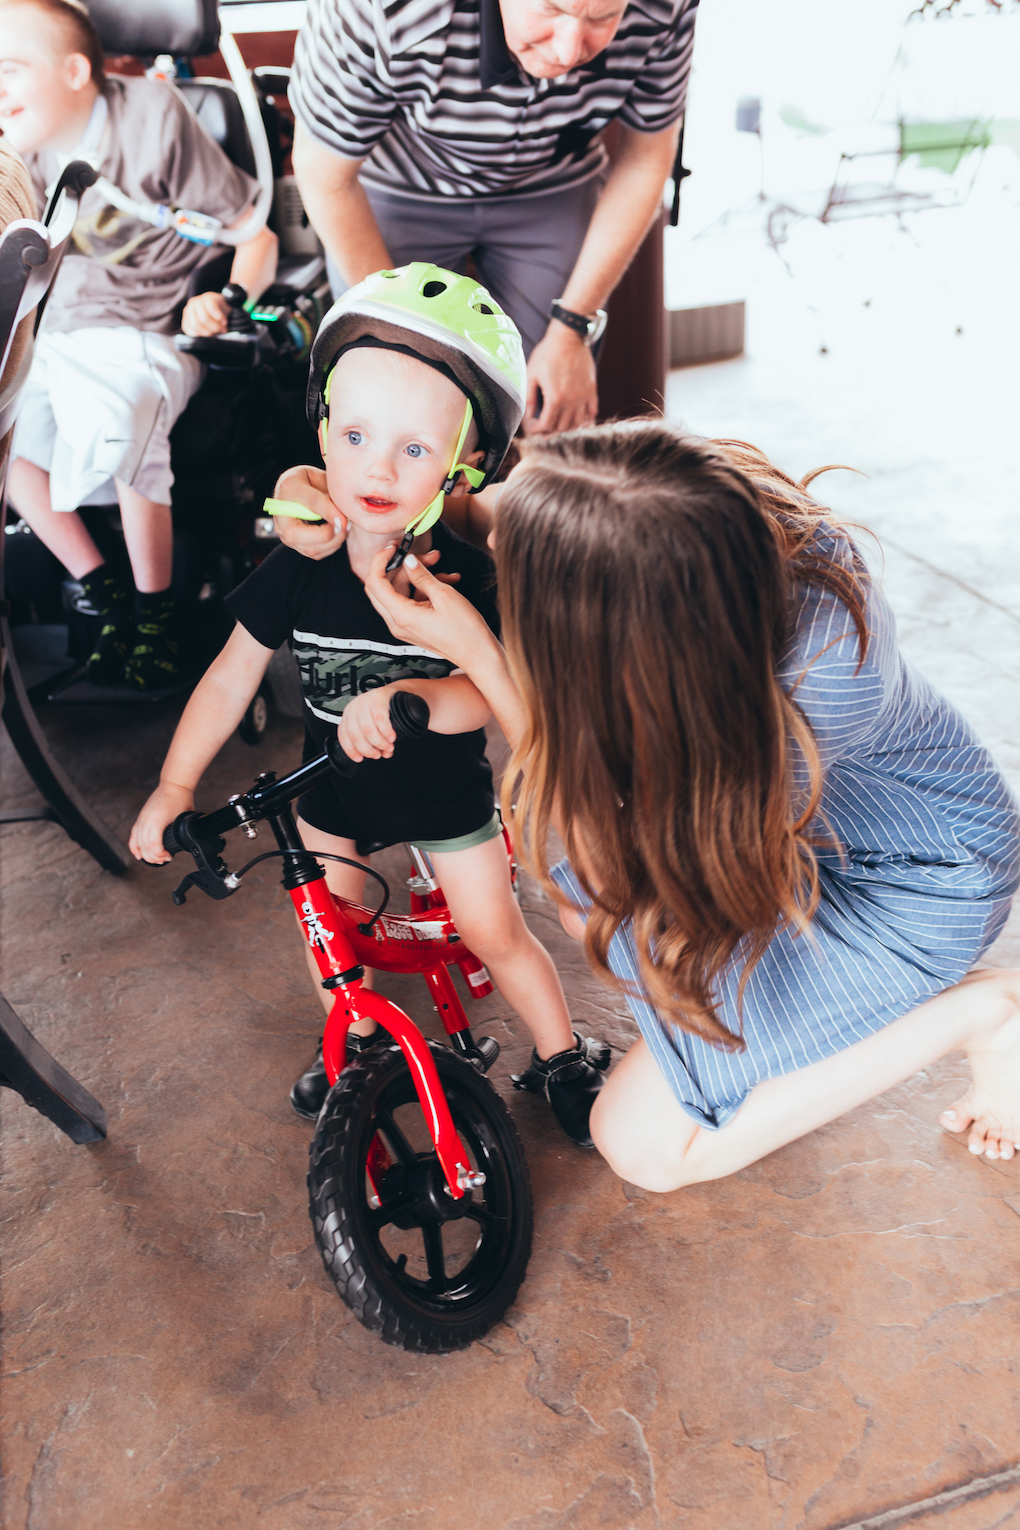 KINGS HAPPY UN-BIRTHDAY - KIDS BALL PARTY by Utah blogger Dani Marie - Toddler riding red balance bike with bright green helmet on